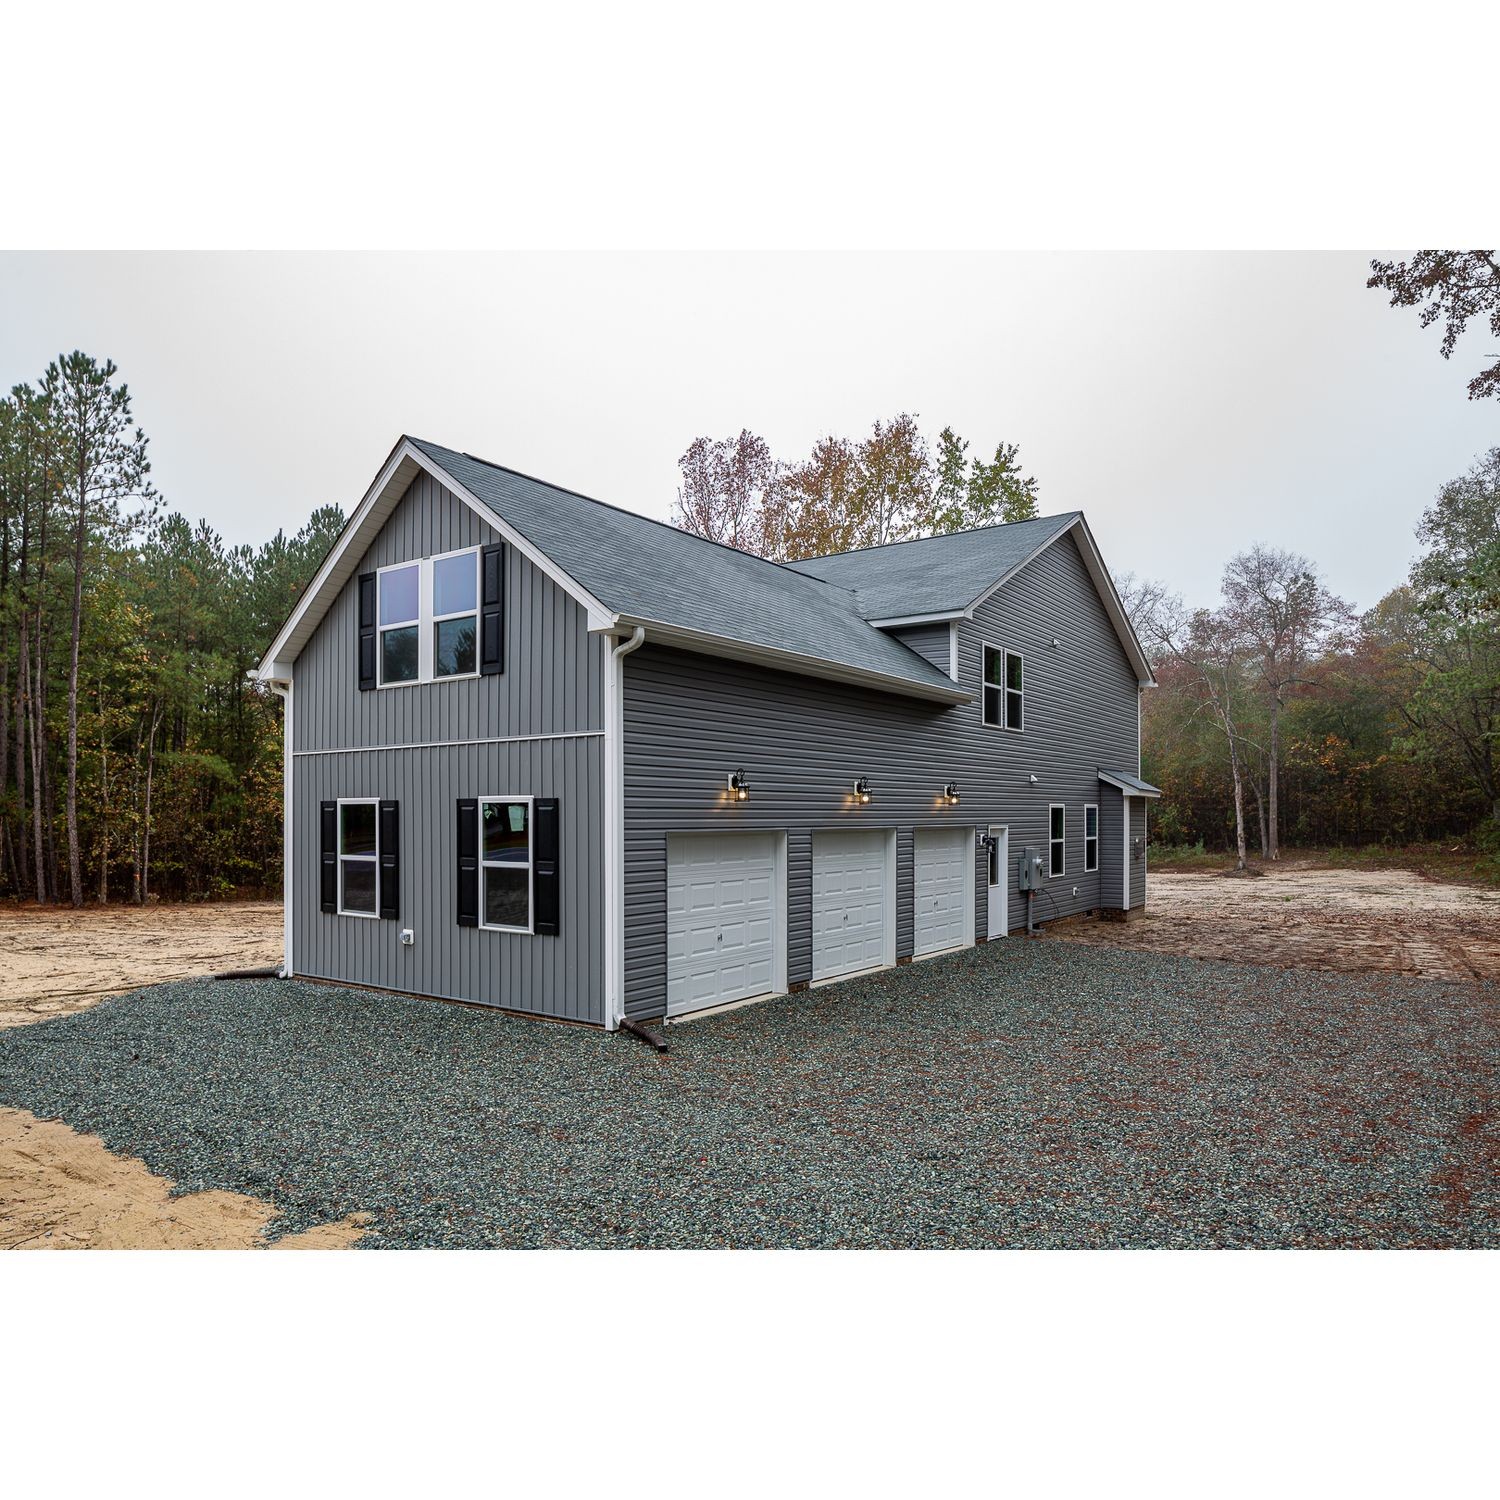 6. Valuebuild Homes - Rocky Mount - Build On Your Lot